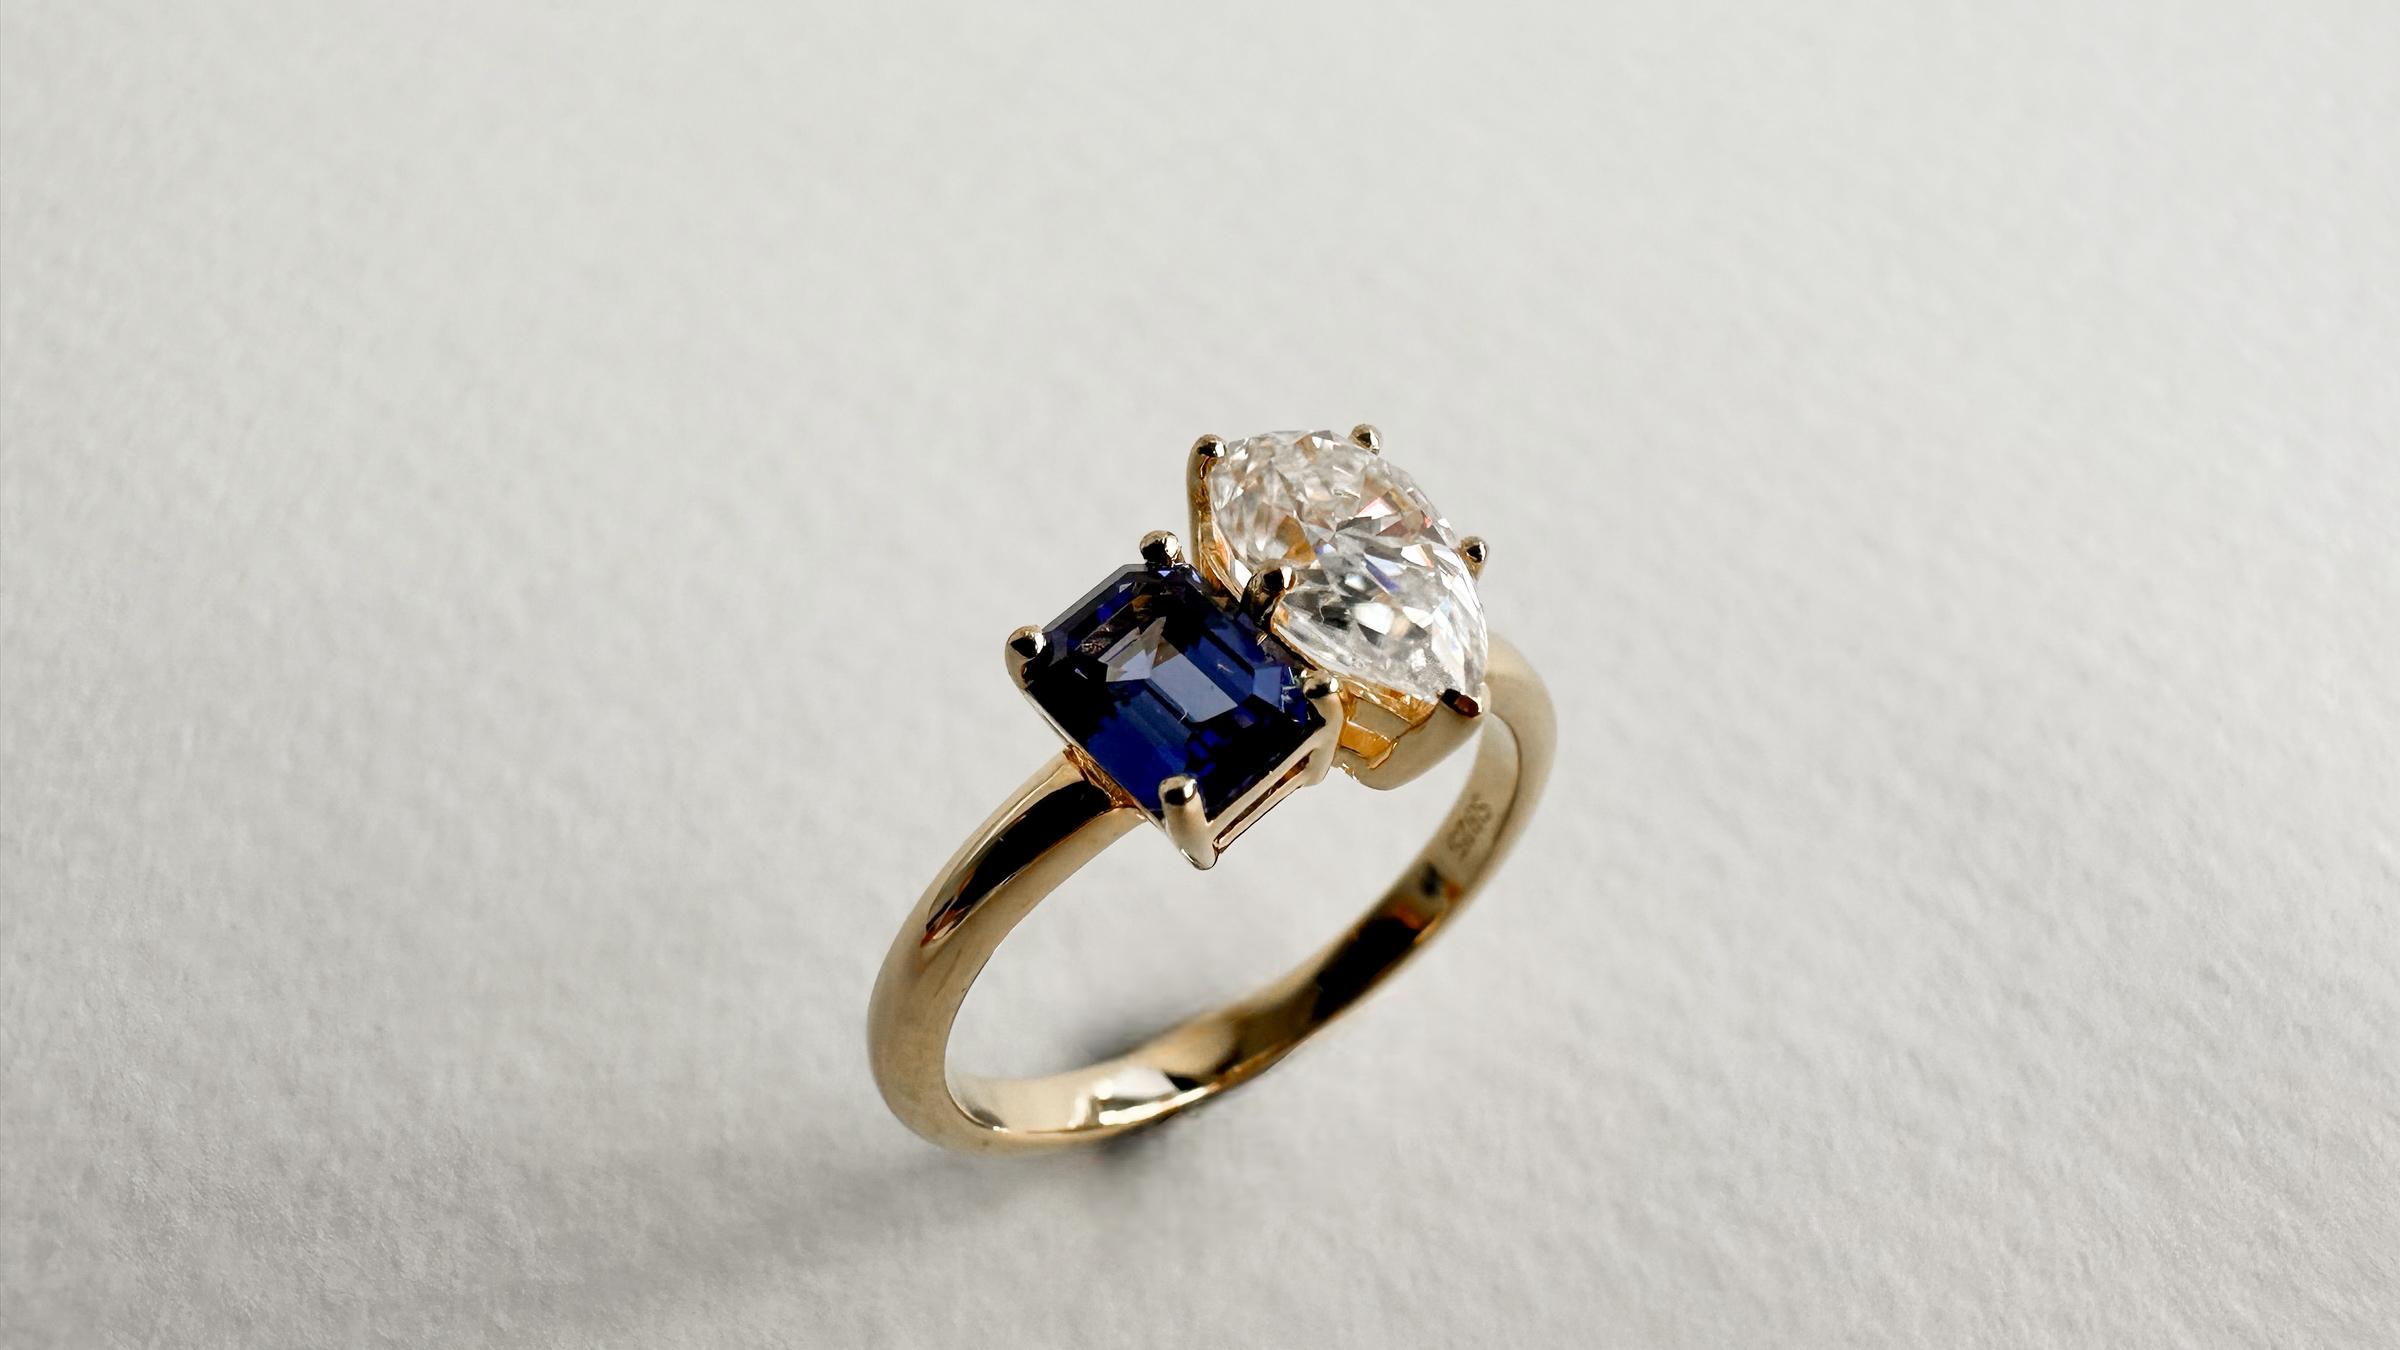 Toi et moi diamond and blue sapphire engagement ring in 14K yellow gold